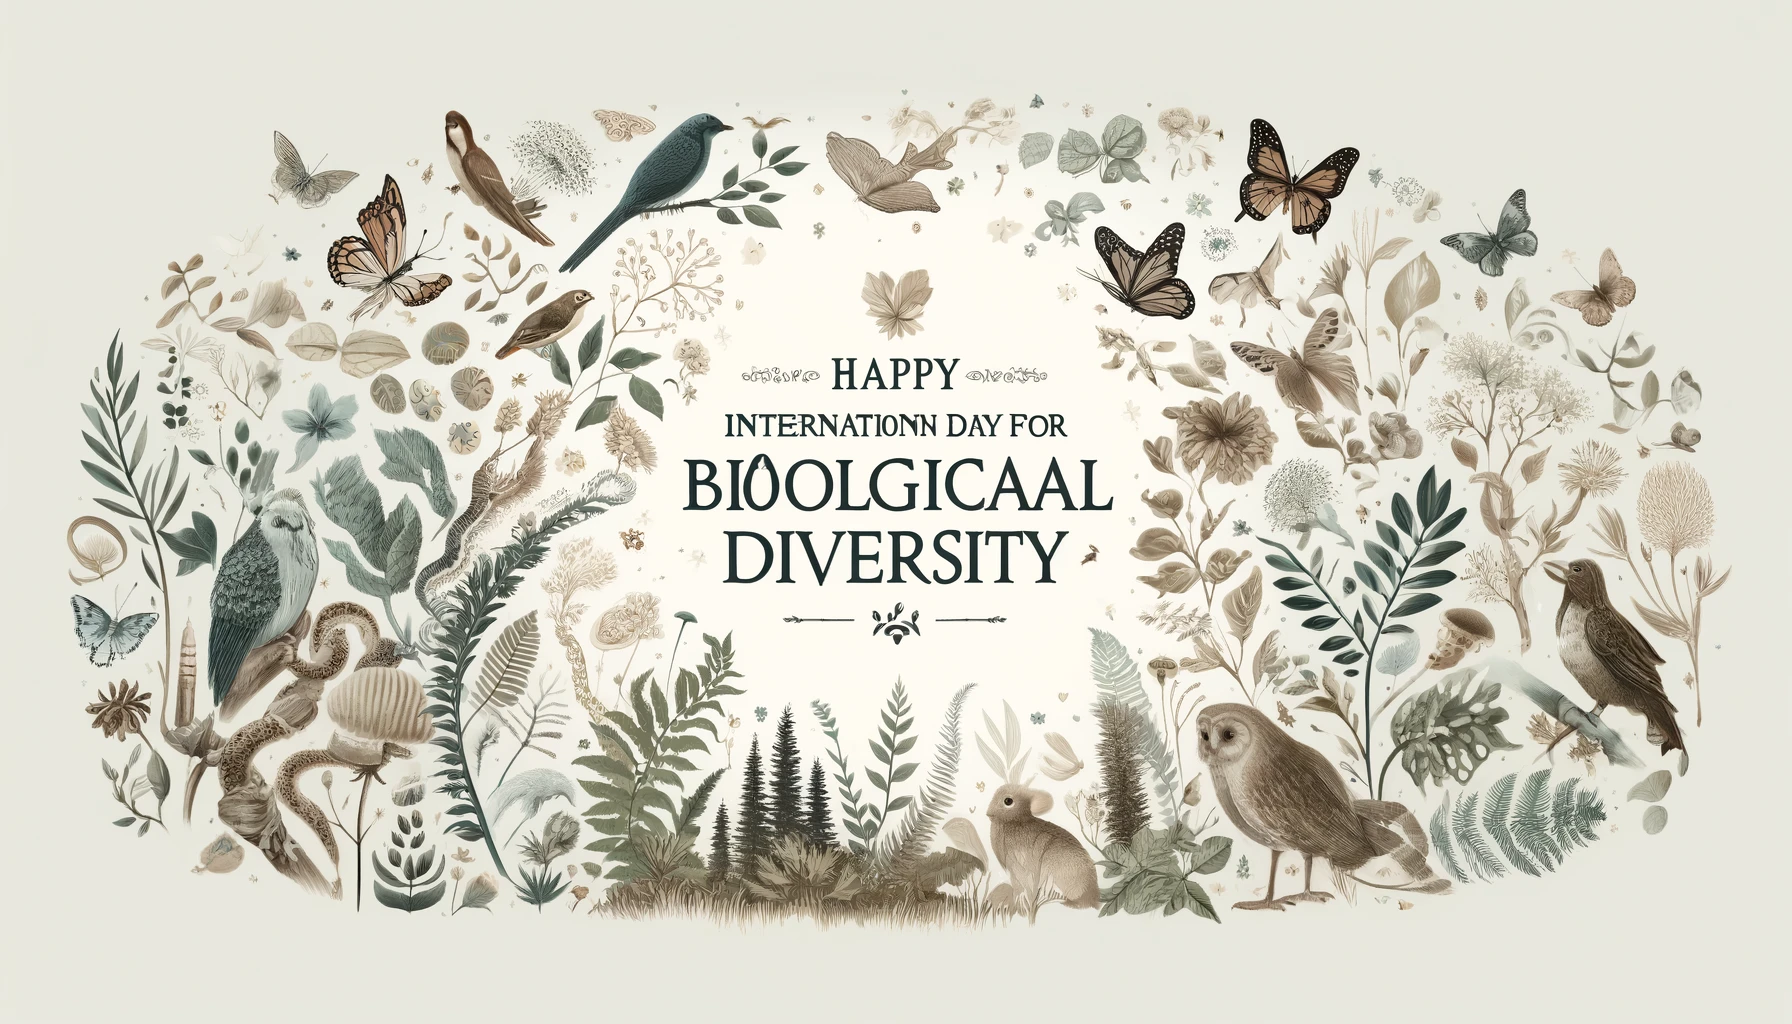 Best Wishes for International Day for Biological Diversity